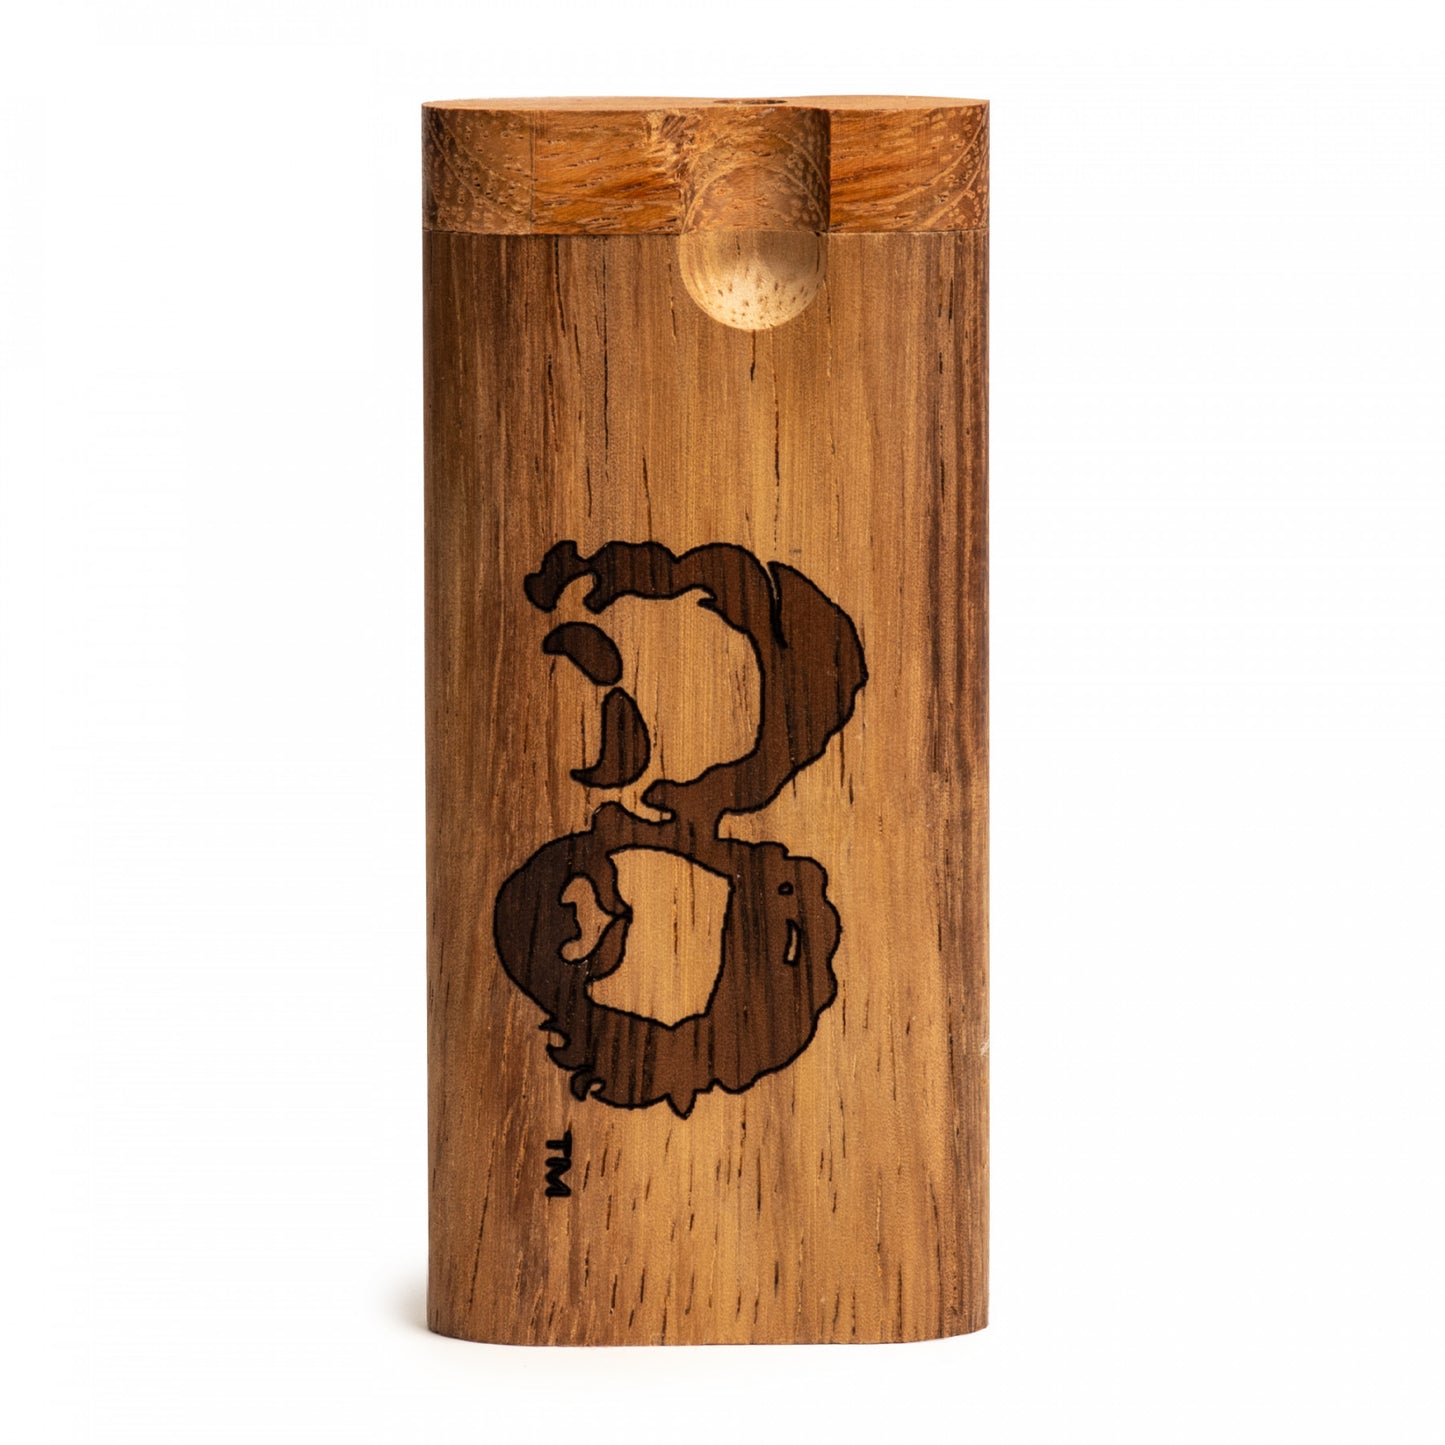 Wooden Dugout with Cheech and Chong Face Shadows